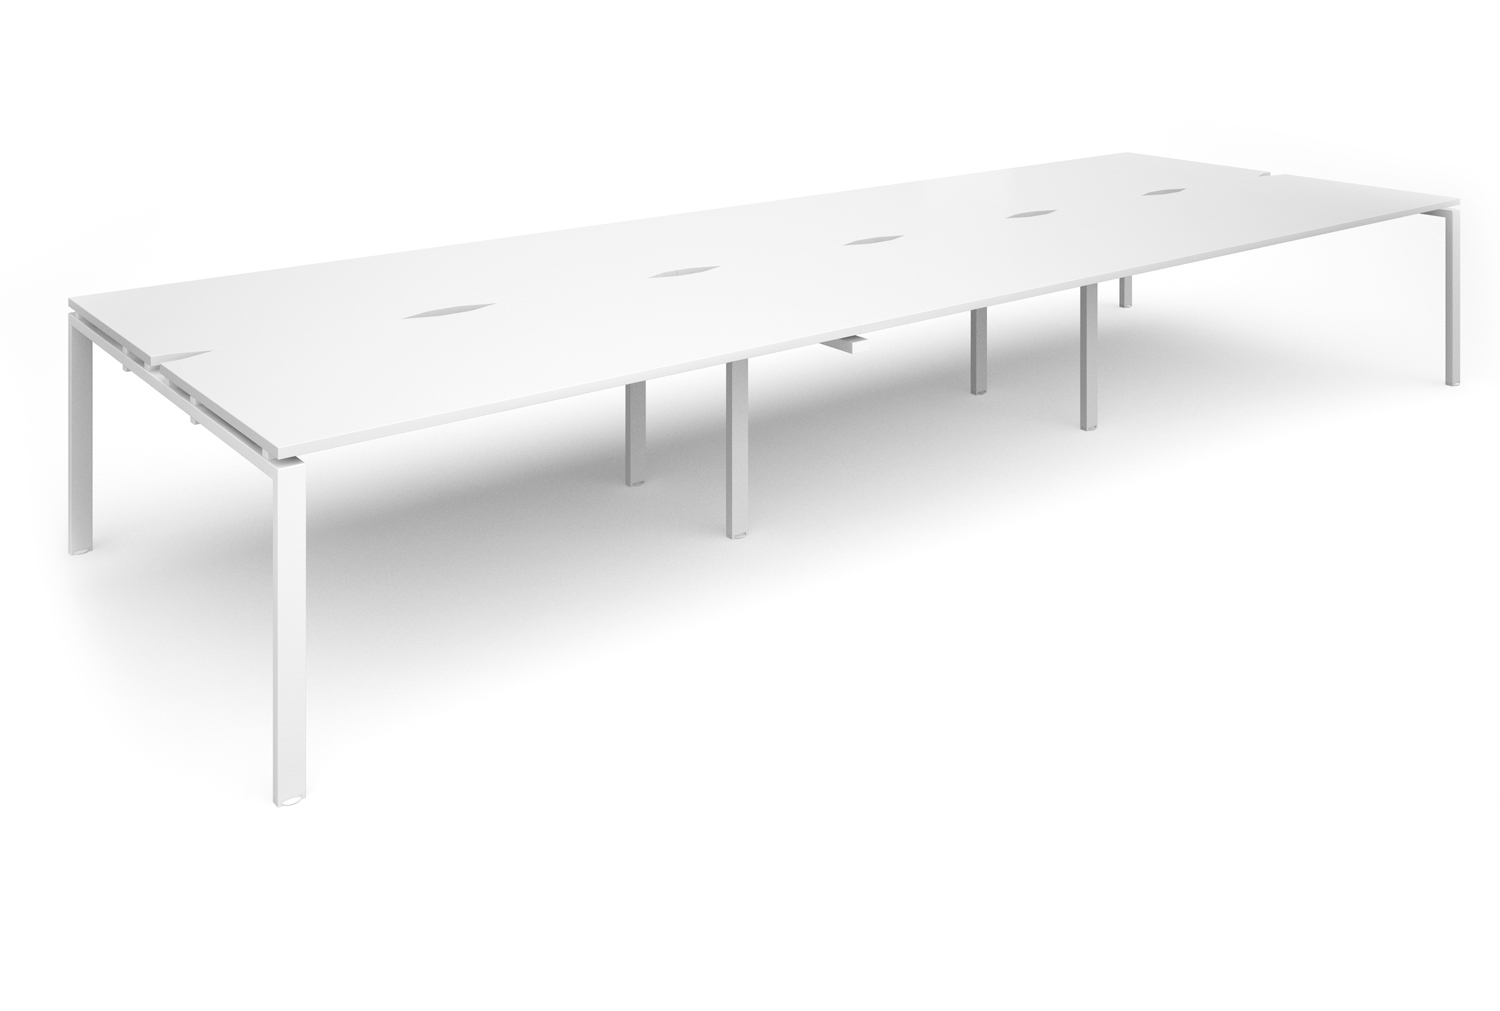 Prime Back To Back Triple Bench Office Desk (White Legs), 480wx160dx73h (cm), White, Express Delivery